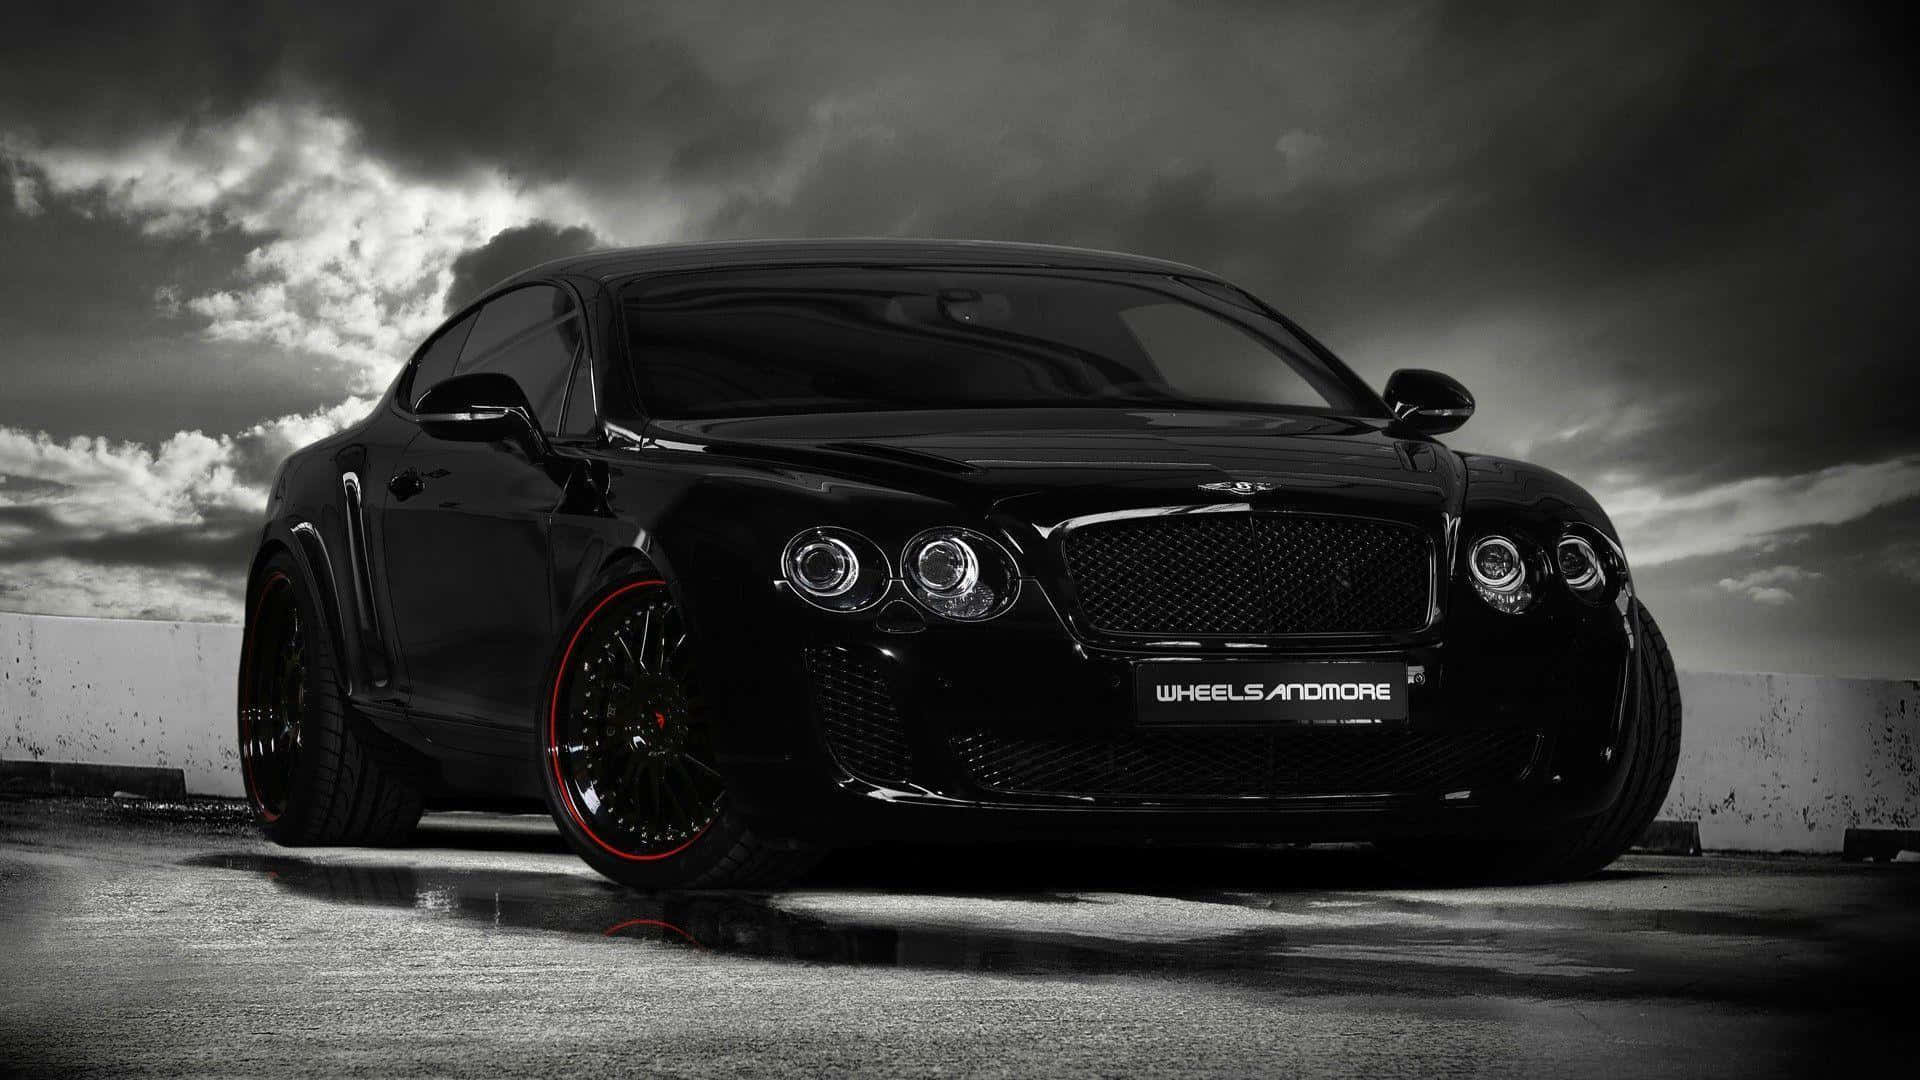 Ride in style with a black car.